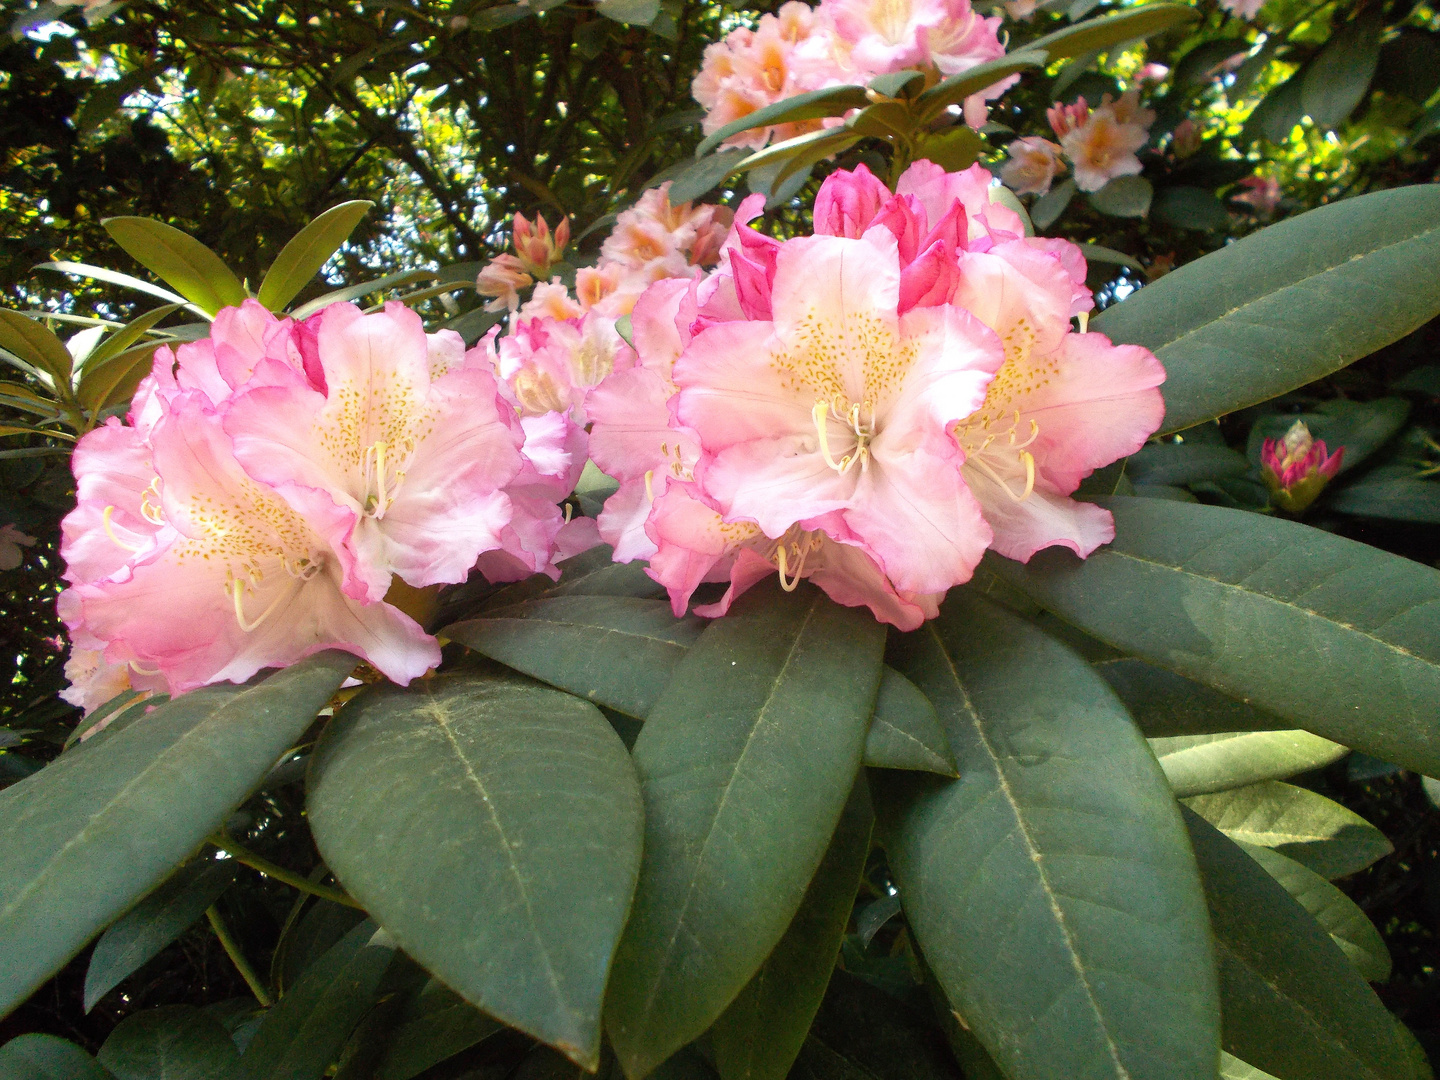 Rhododendron rosa-changierend